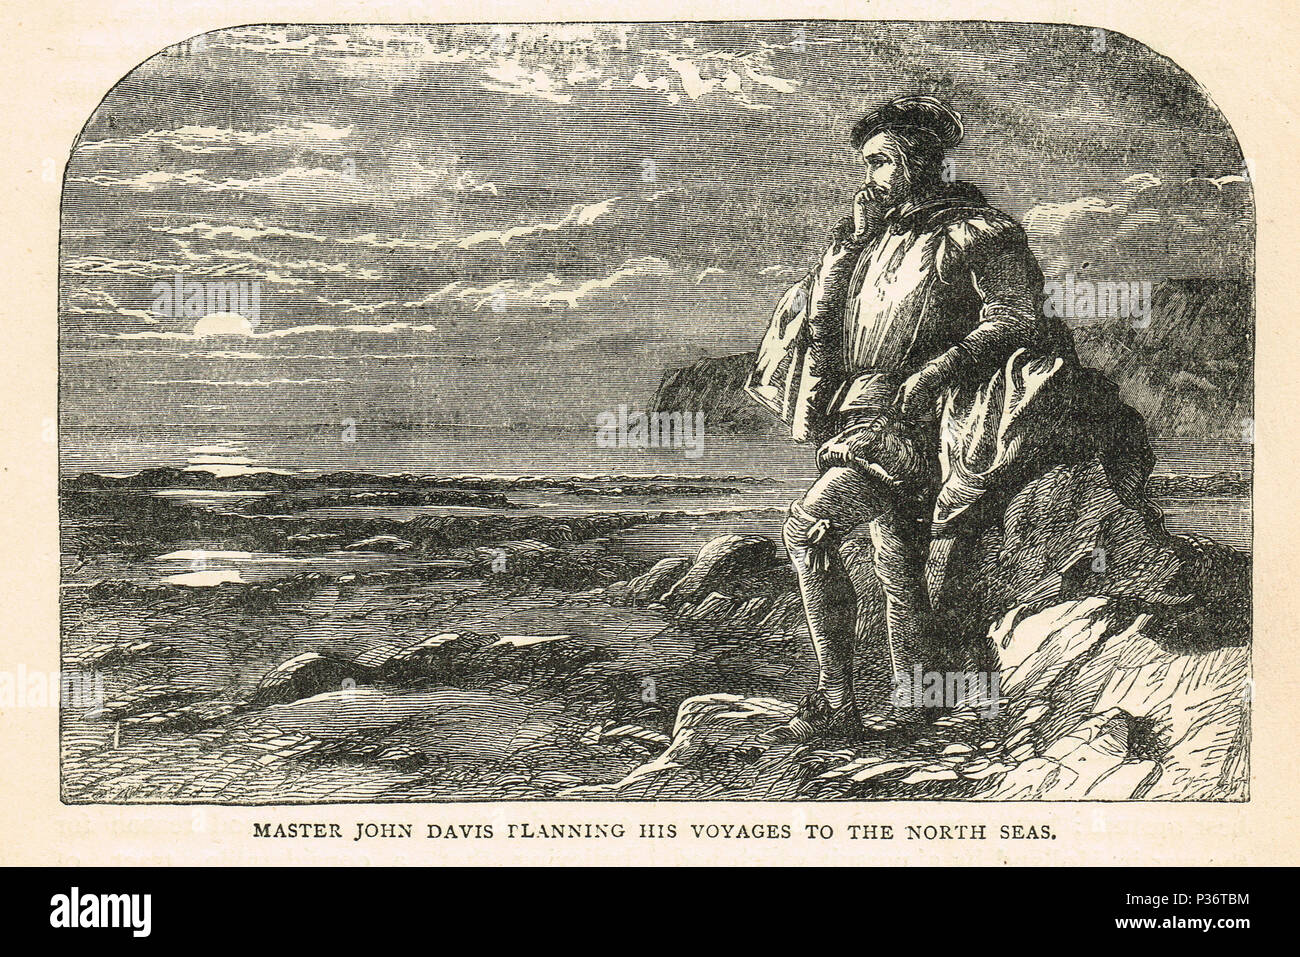 John Davis, English explorer, looking out to sea, planning his voyage to the North seas Stock Photo